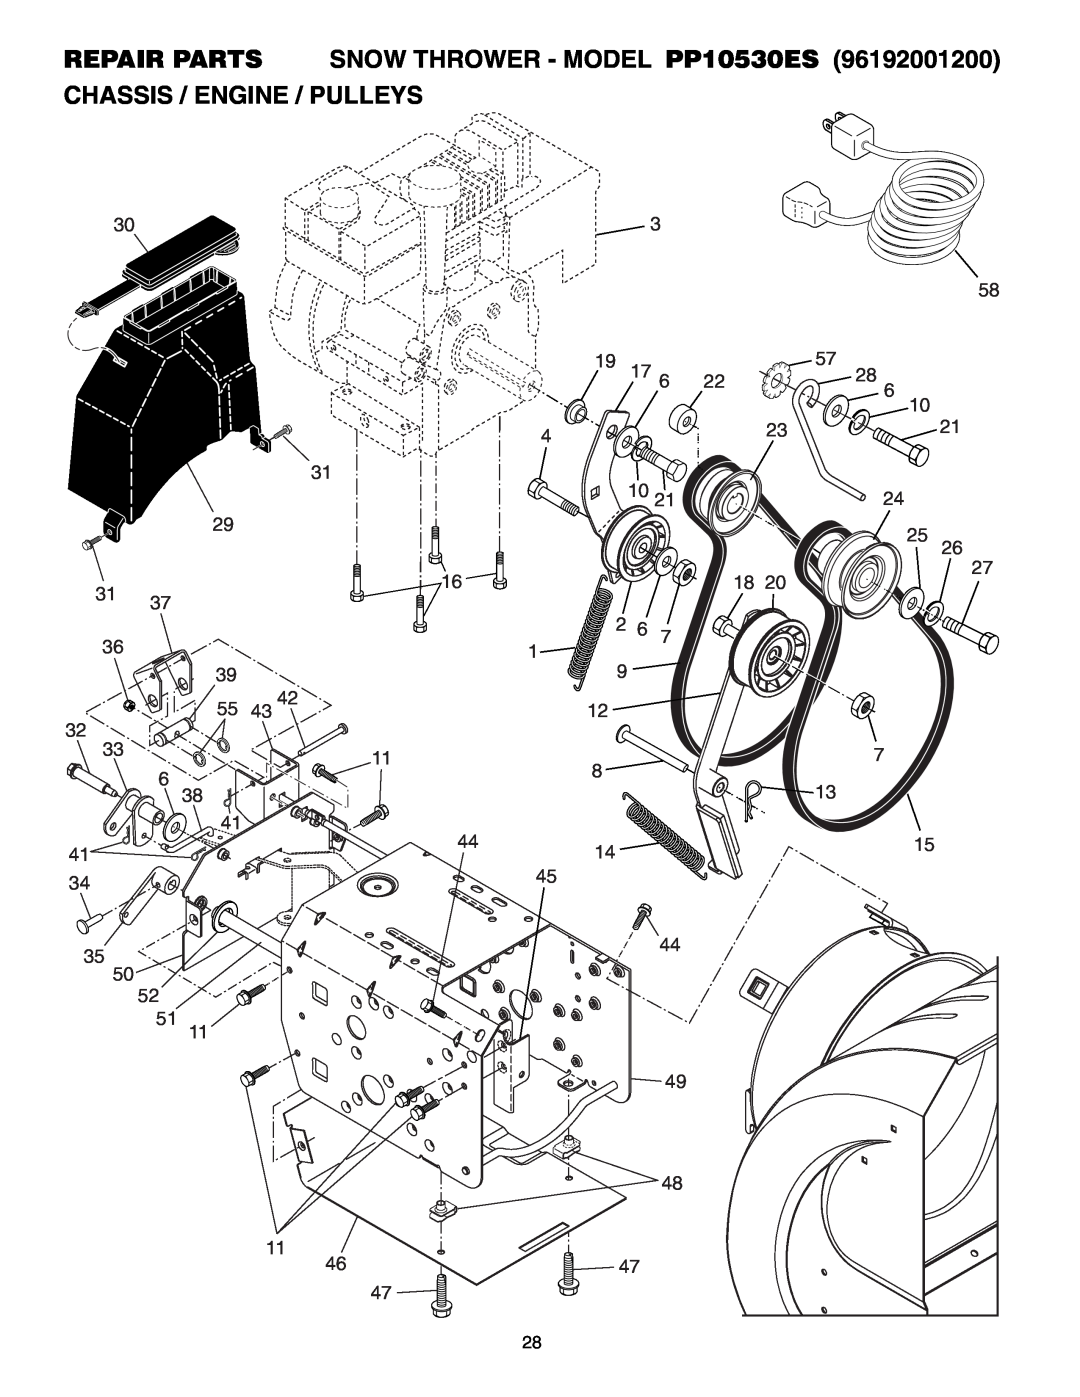 Poulan 96192001200, 407885 owner manual Chassis / Engine / Pulleys, REPAIR PARTS SNOW THROWER - MODEL PP10530ES 